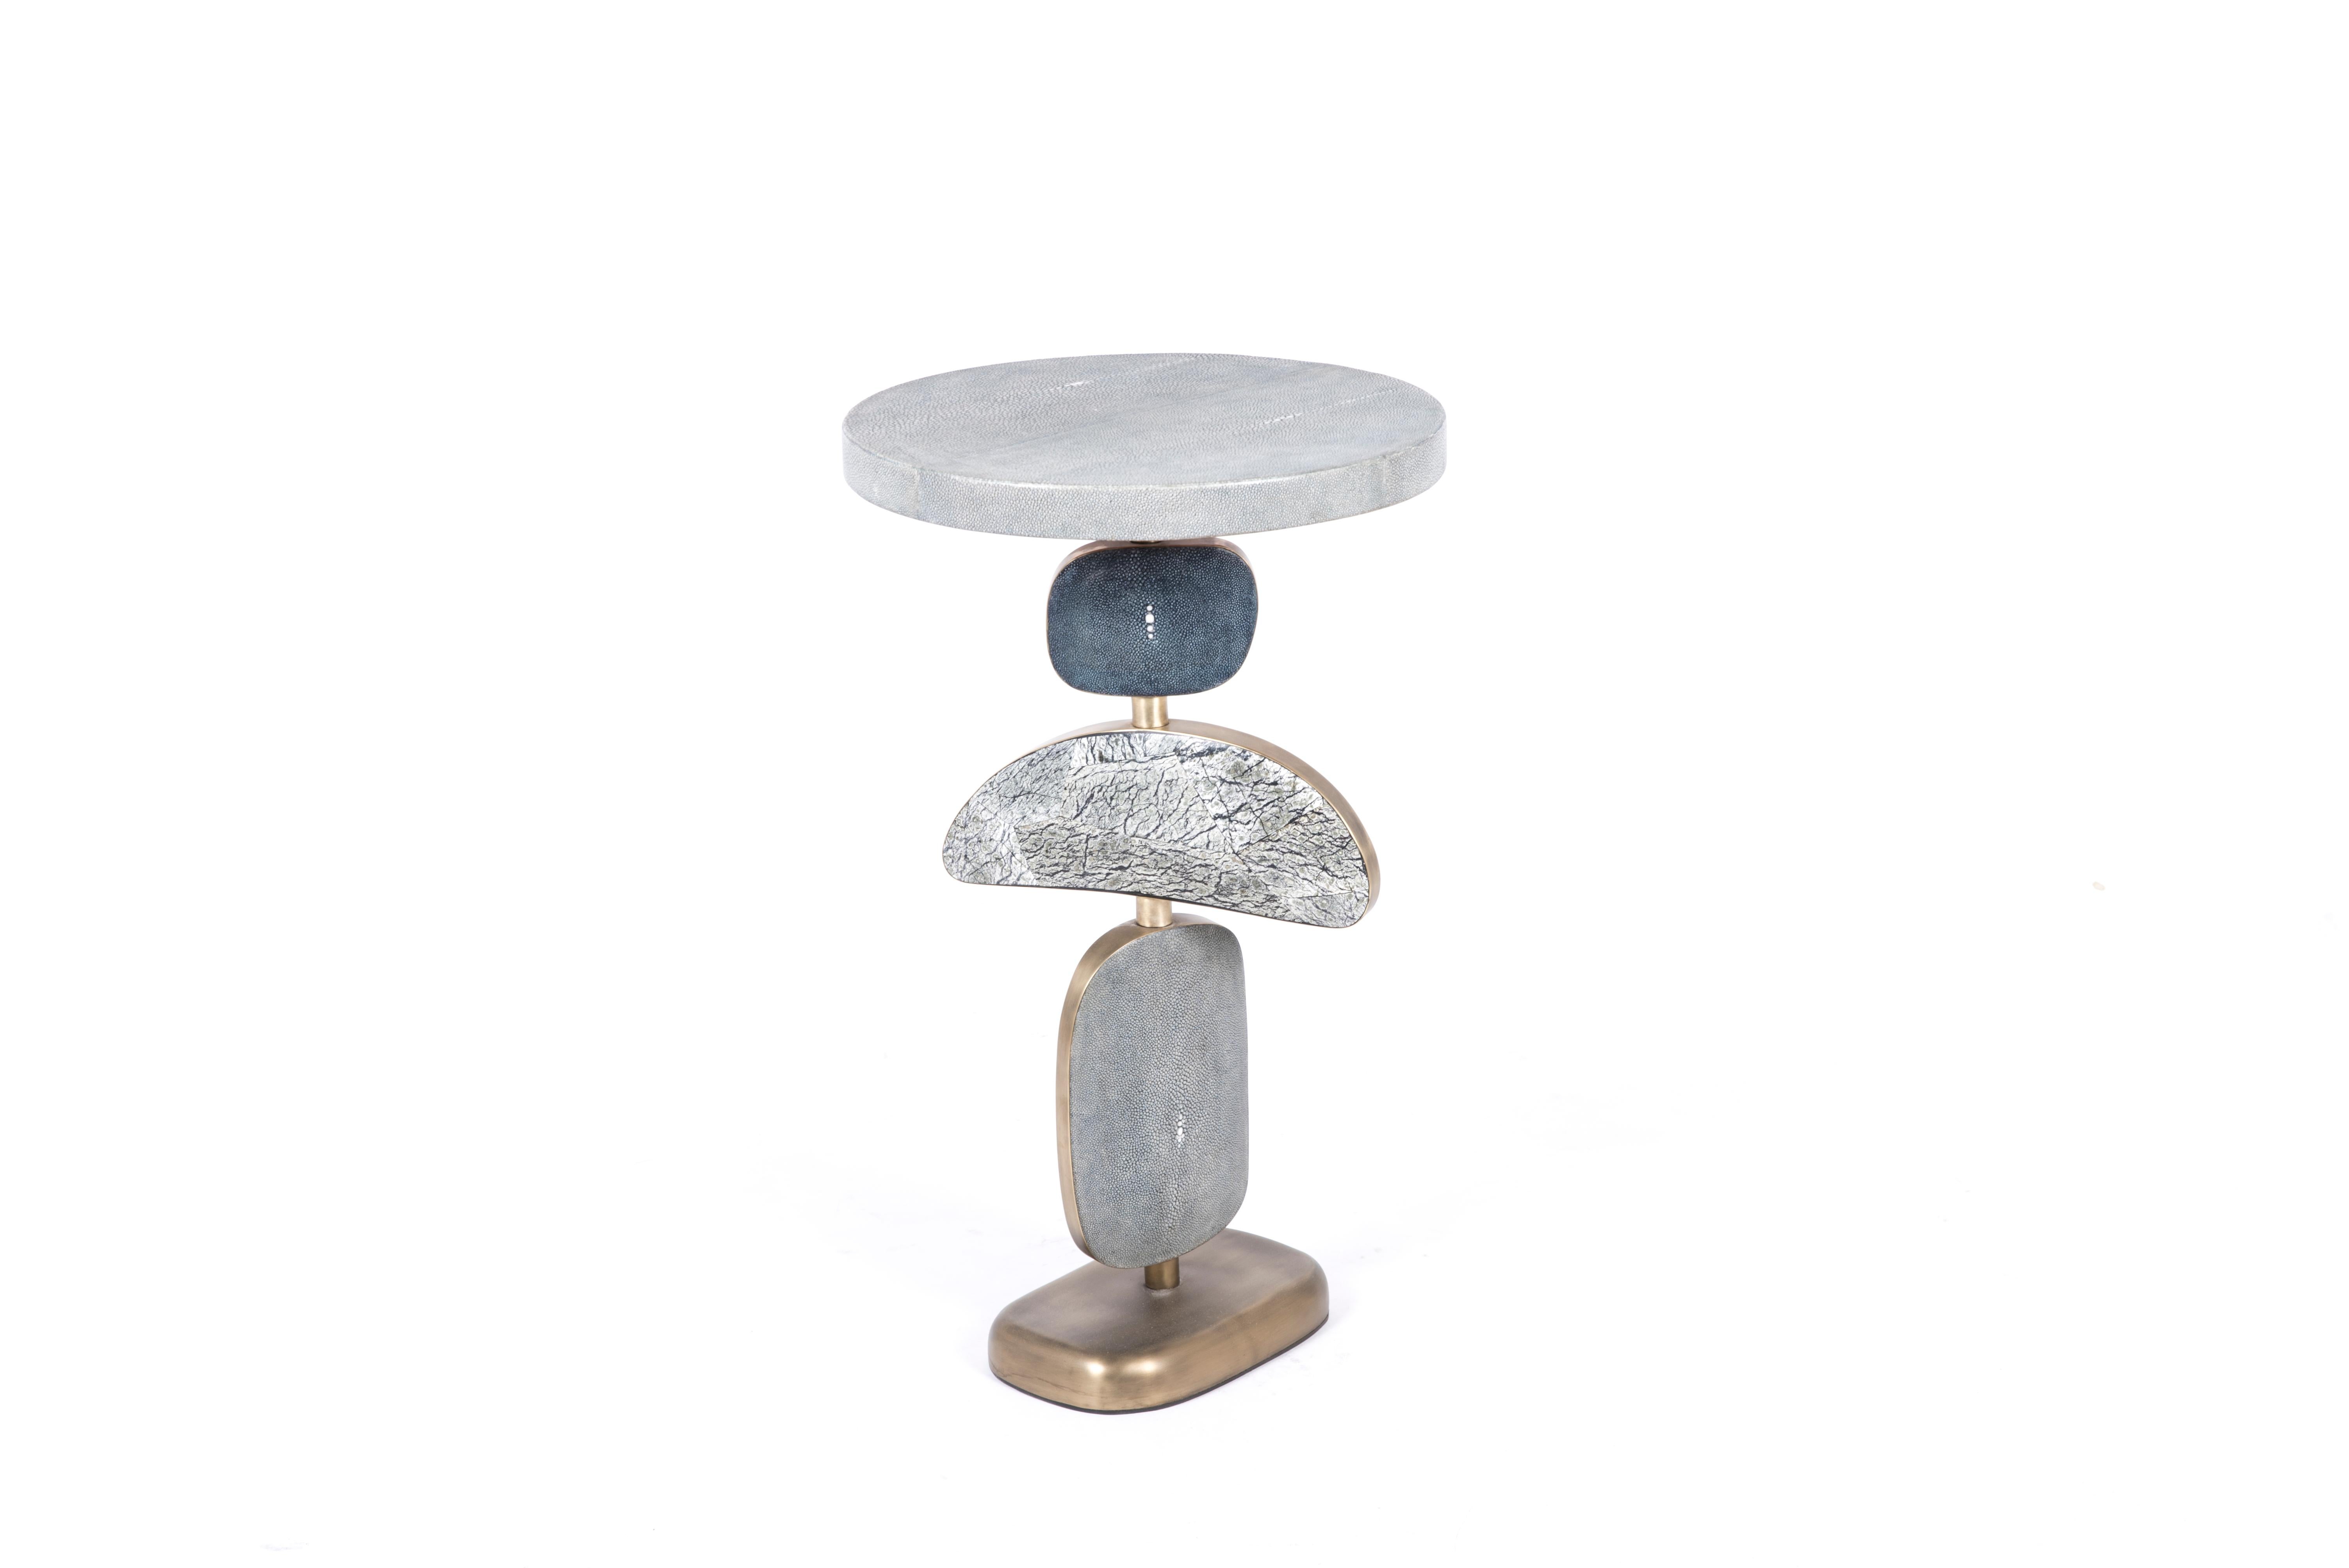 The cosmo side table by Kifu Paris is a whimsical and sculptural piece, inlaid in different shades of blue Shagreen, Baguio stone and bronze-patina brass. The amorphous shapes on the bottom part can be moved to adjust the angle of each part.